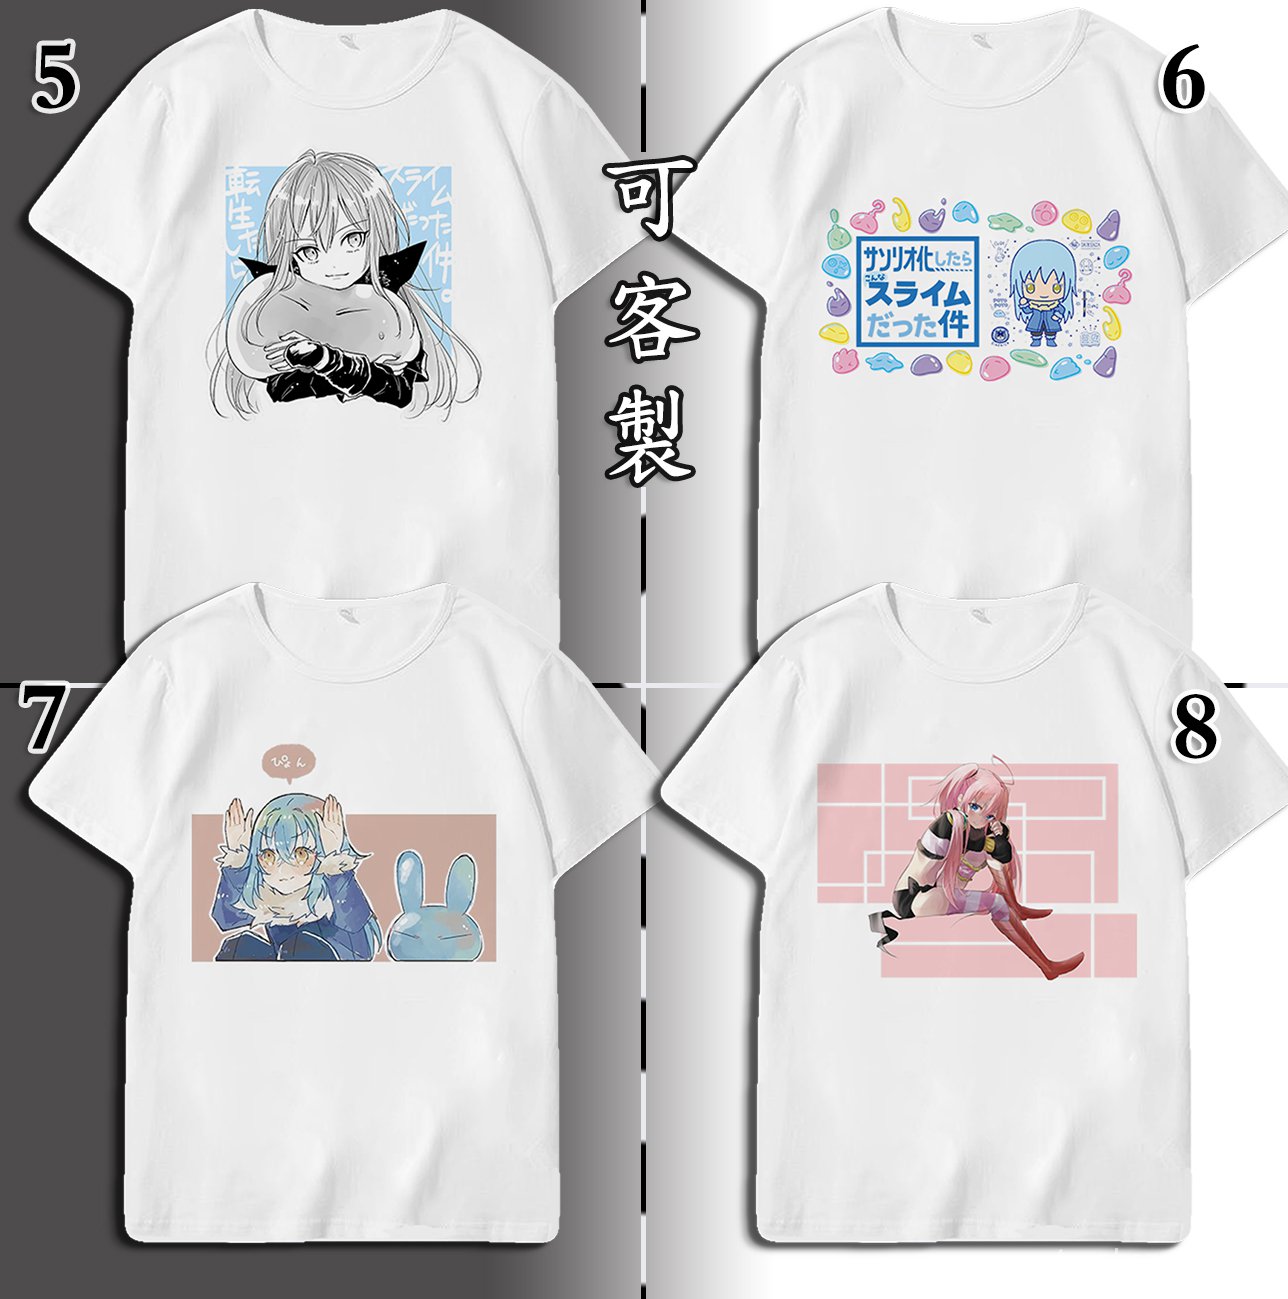 That Time I Got Reincarnated as a Slime T shirt Graphic Short Sleeves T-Shirt  Cartoon Tee Family Matching T-shirt Mommy/daddy and Kids T Shirt  Children Boys Girls